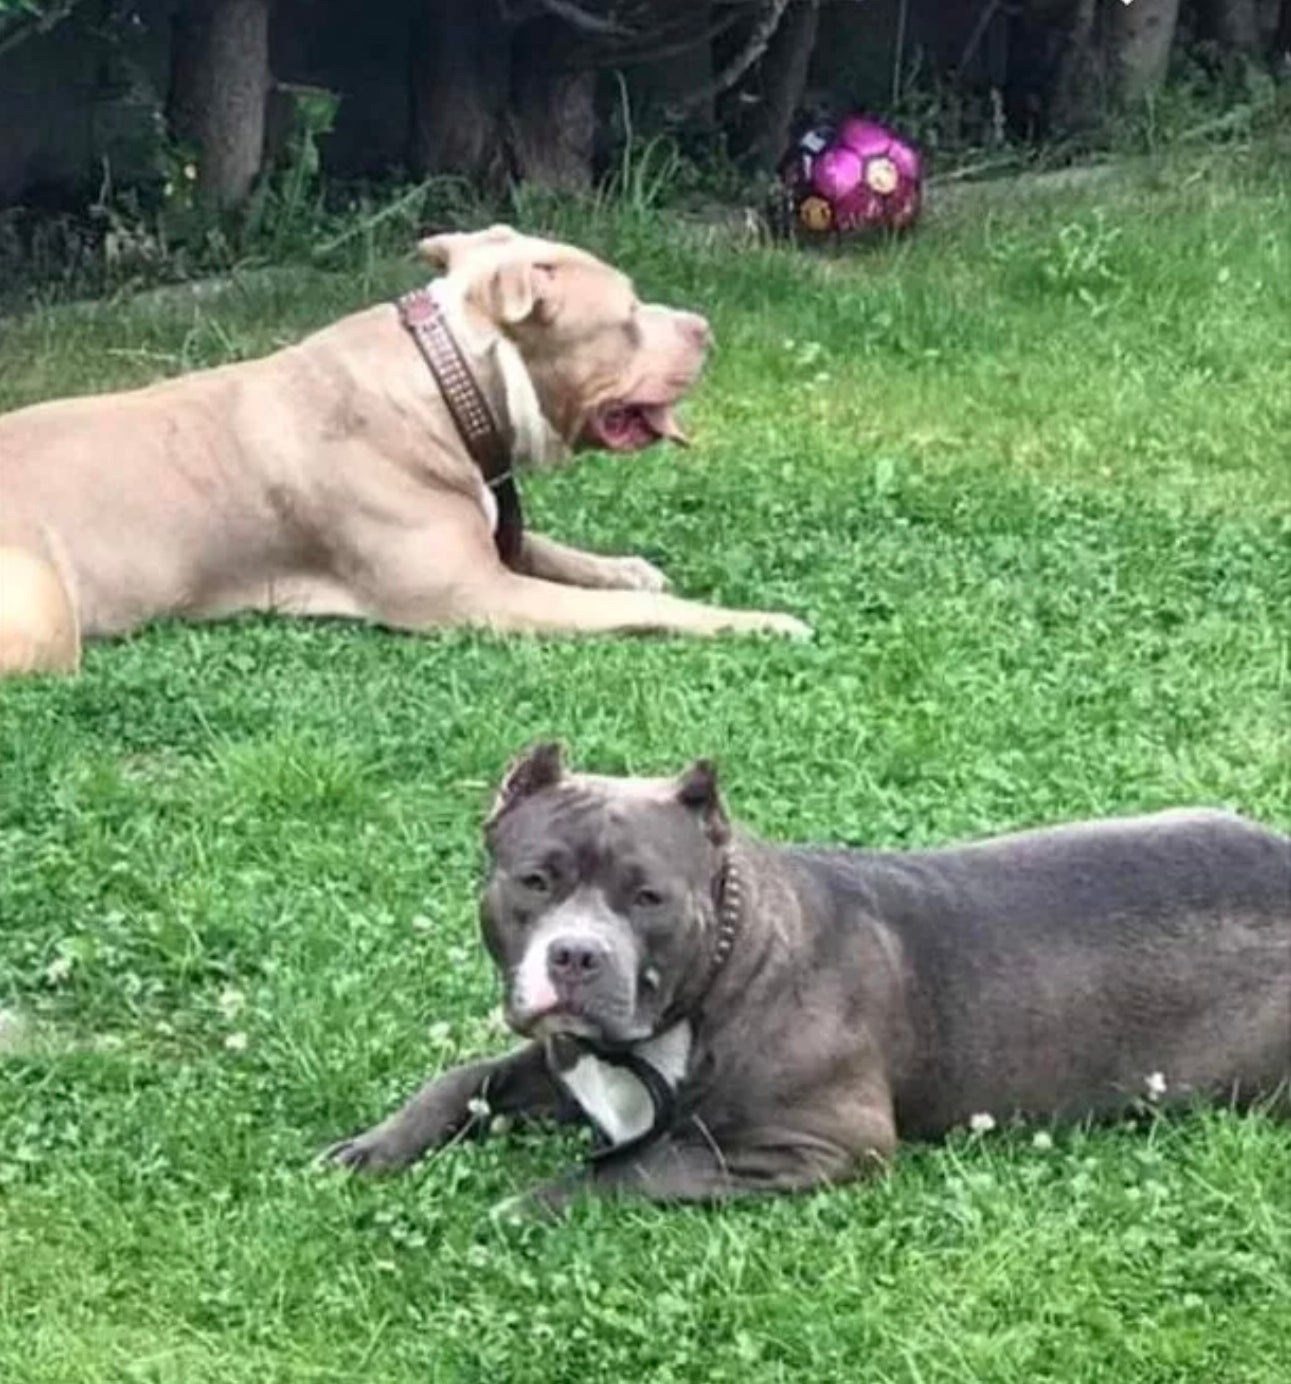 The two XL Bully dogs belonging to Marcus Walsh who attacked a woman and her puppy in Barry